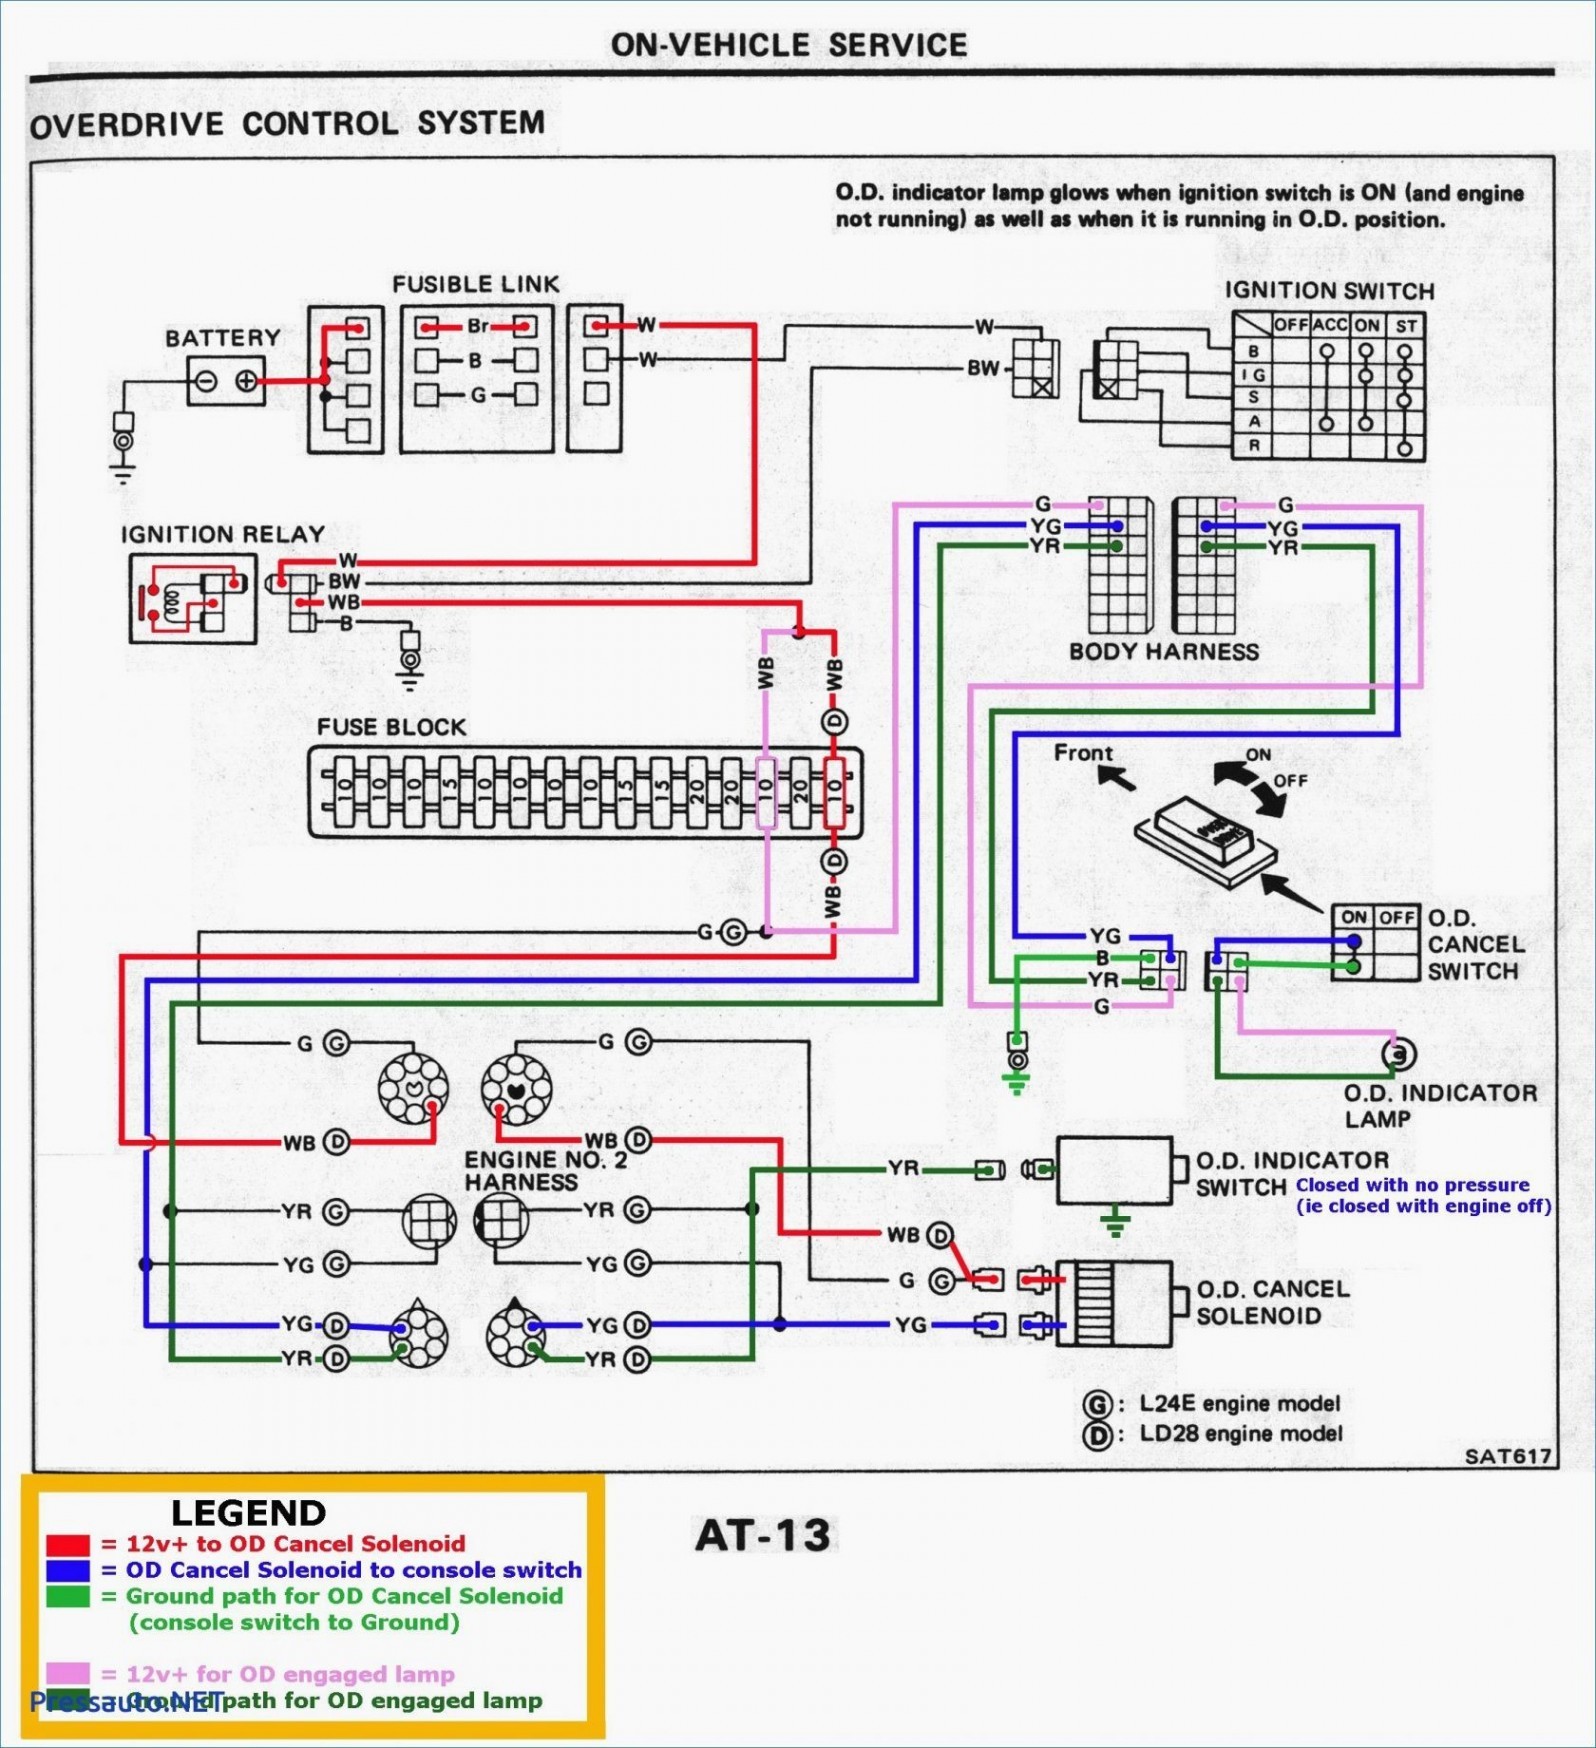 Wiring Diagram For Ford F150 Trailer Lights From Truck Electrical Circuit Trailer Wire Diagram – Simple Trailer Light Wiring Diagram Thinker